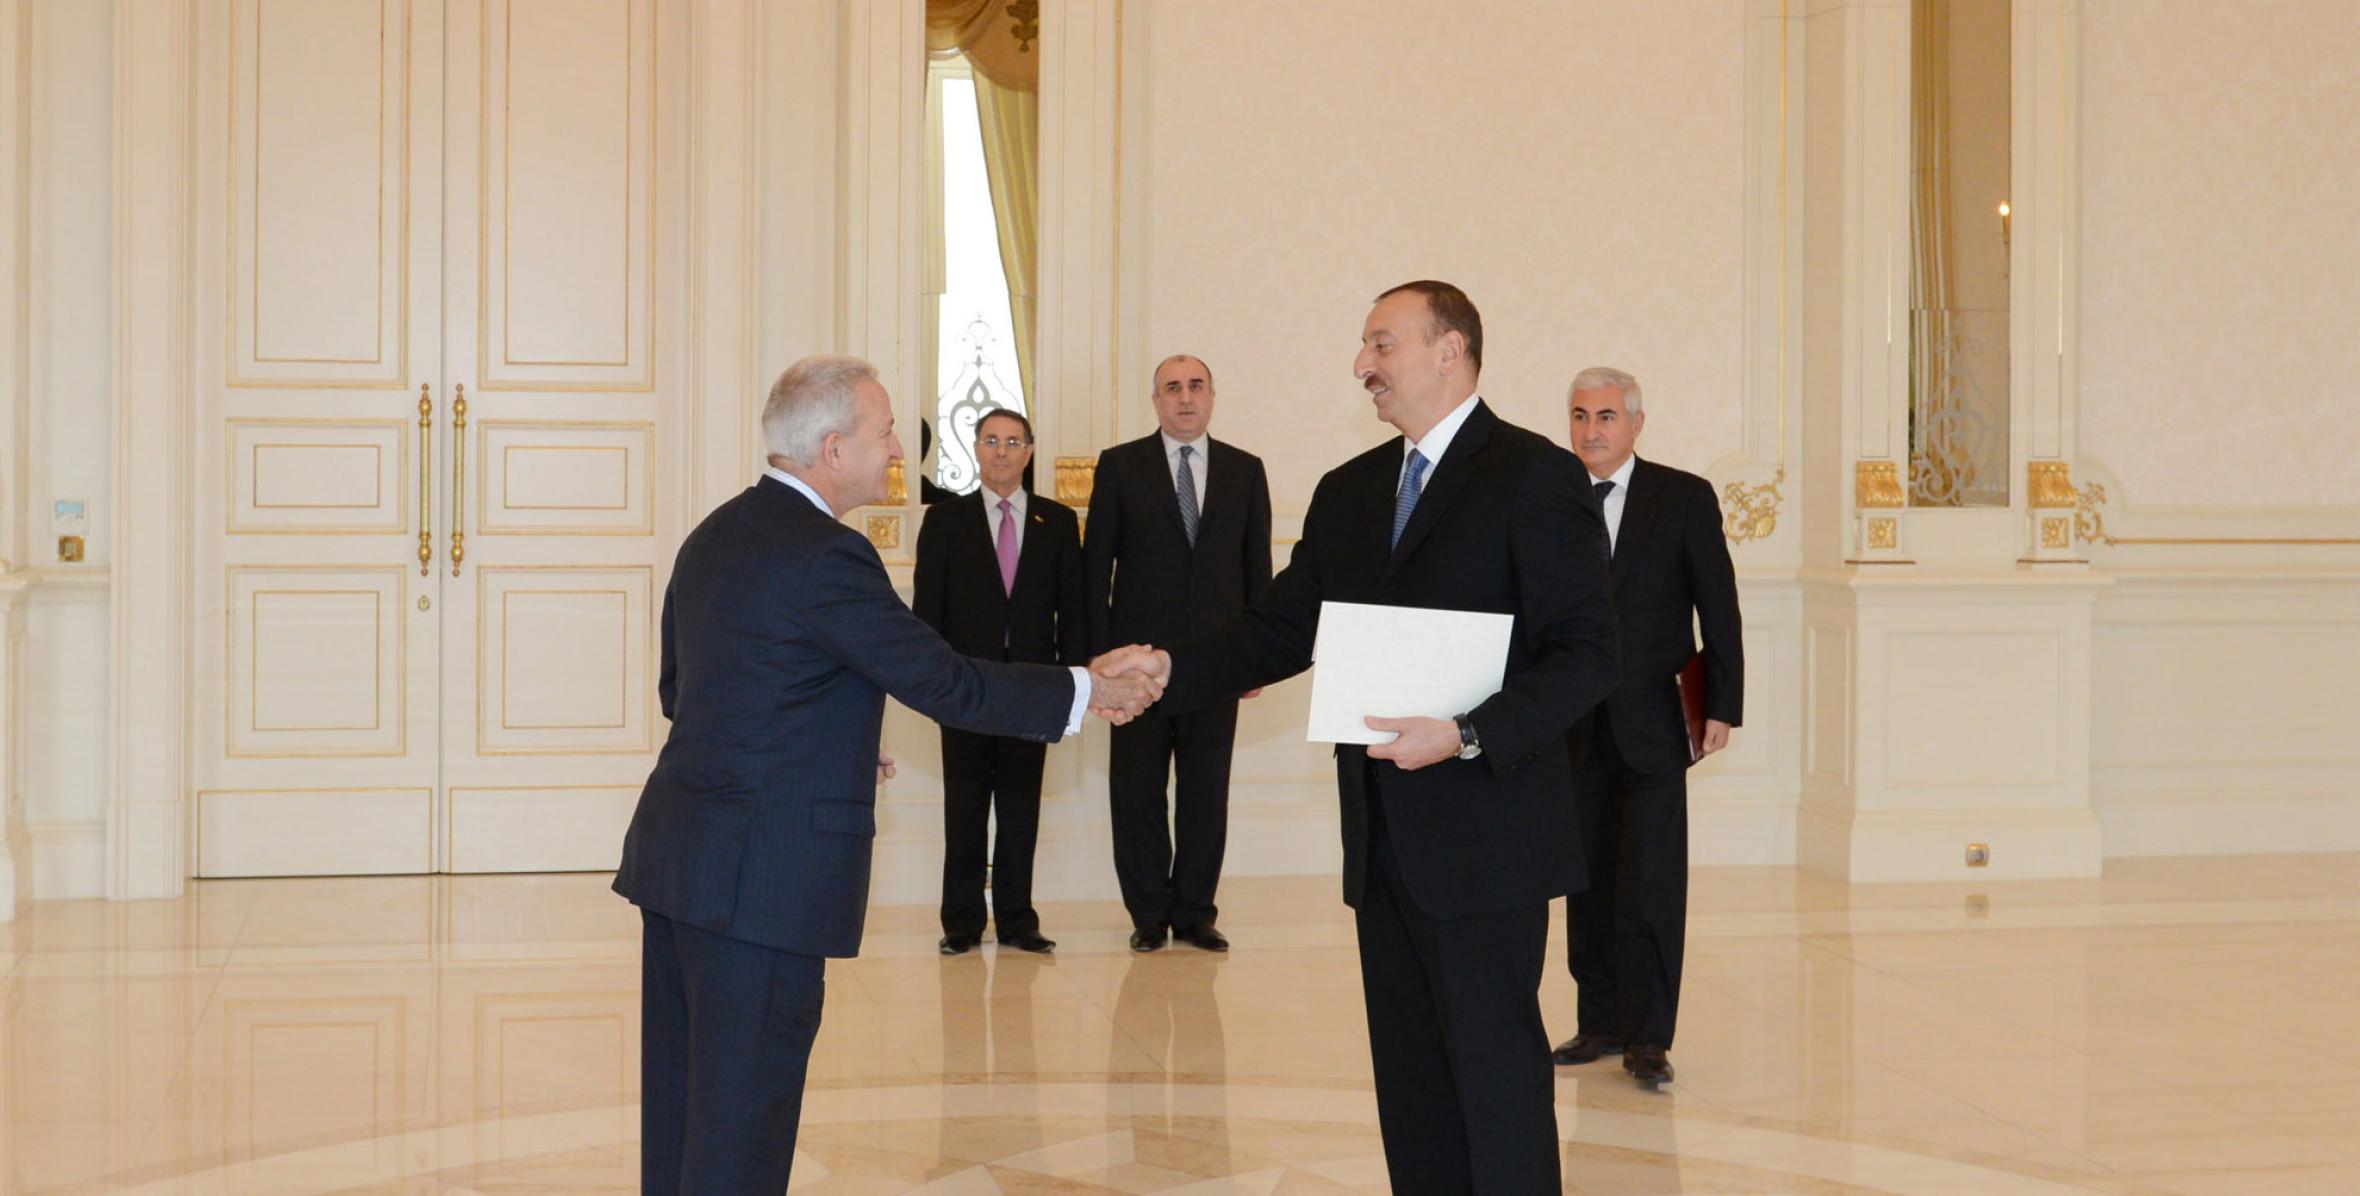 Ilham Aliyev accepted the credentials from the newly-appointed Ambassador of the Republic of Ireland to Azerbaijan